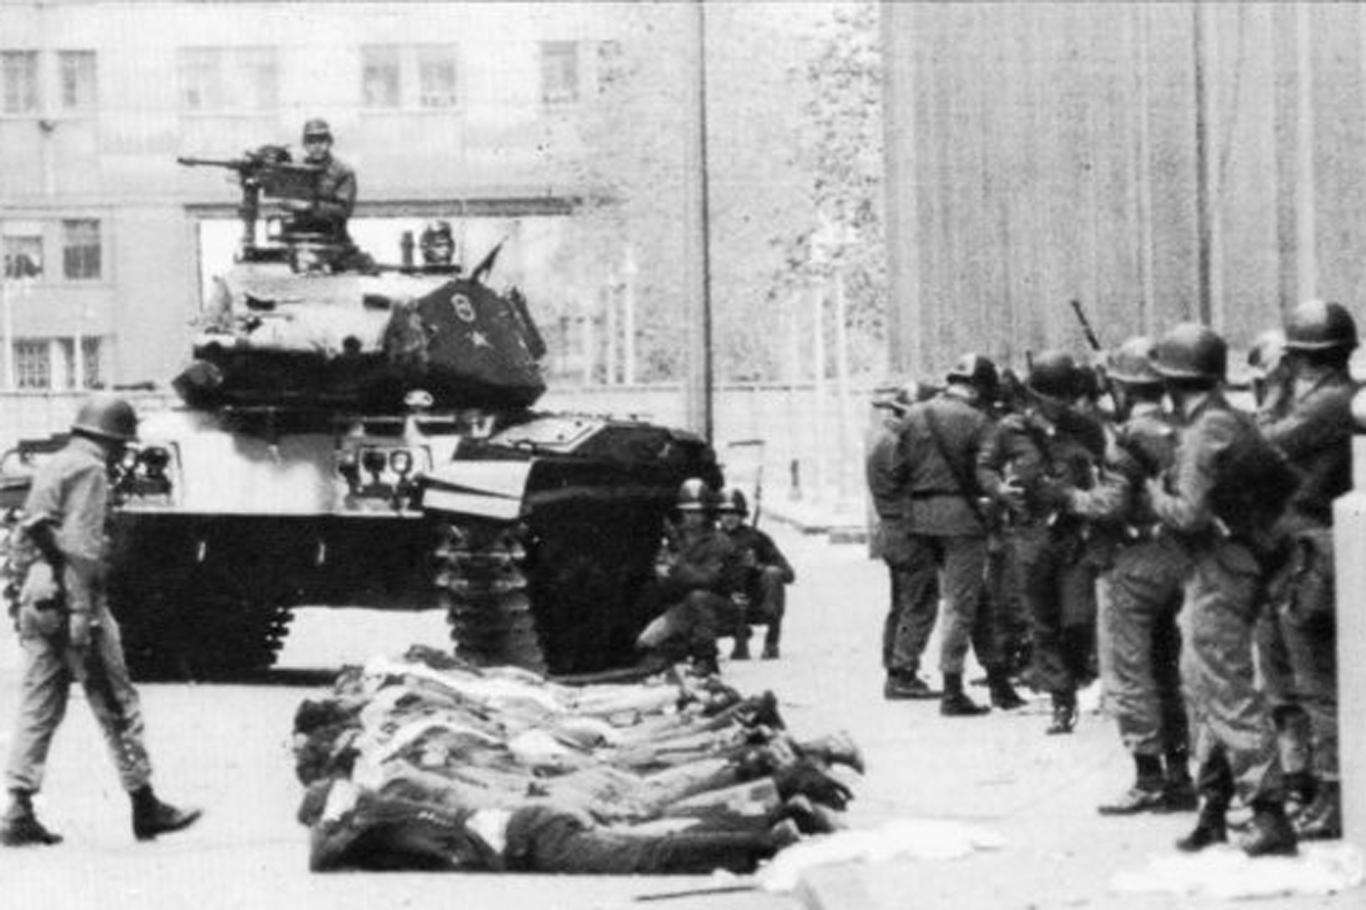 A black stain in Turkey's history: Military coup of September 12, 1980